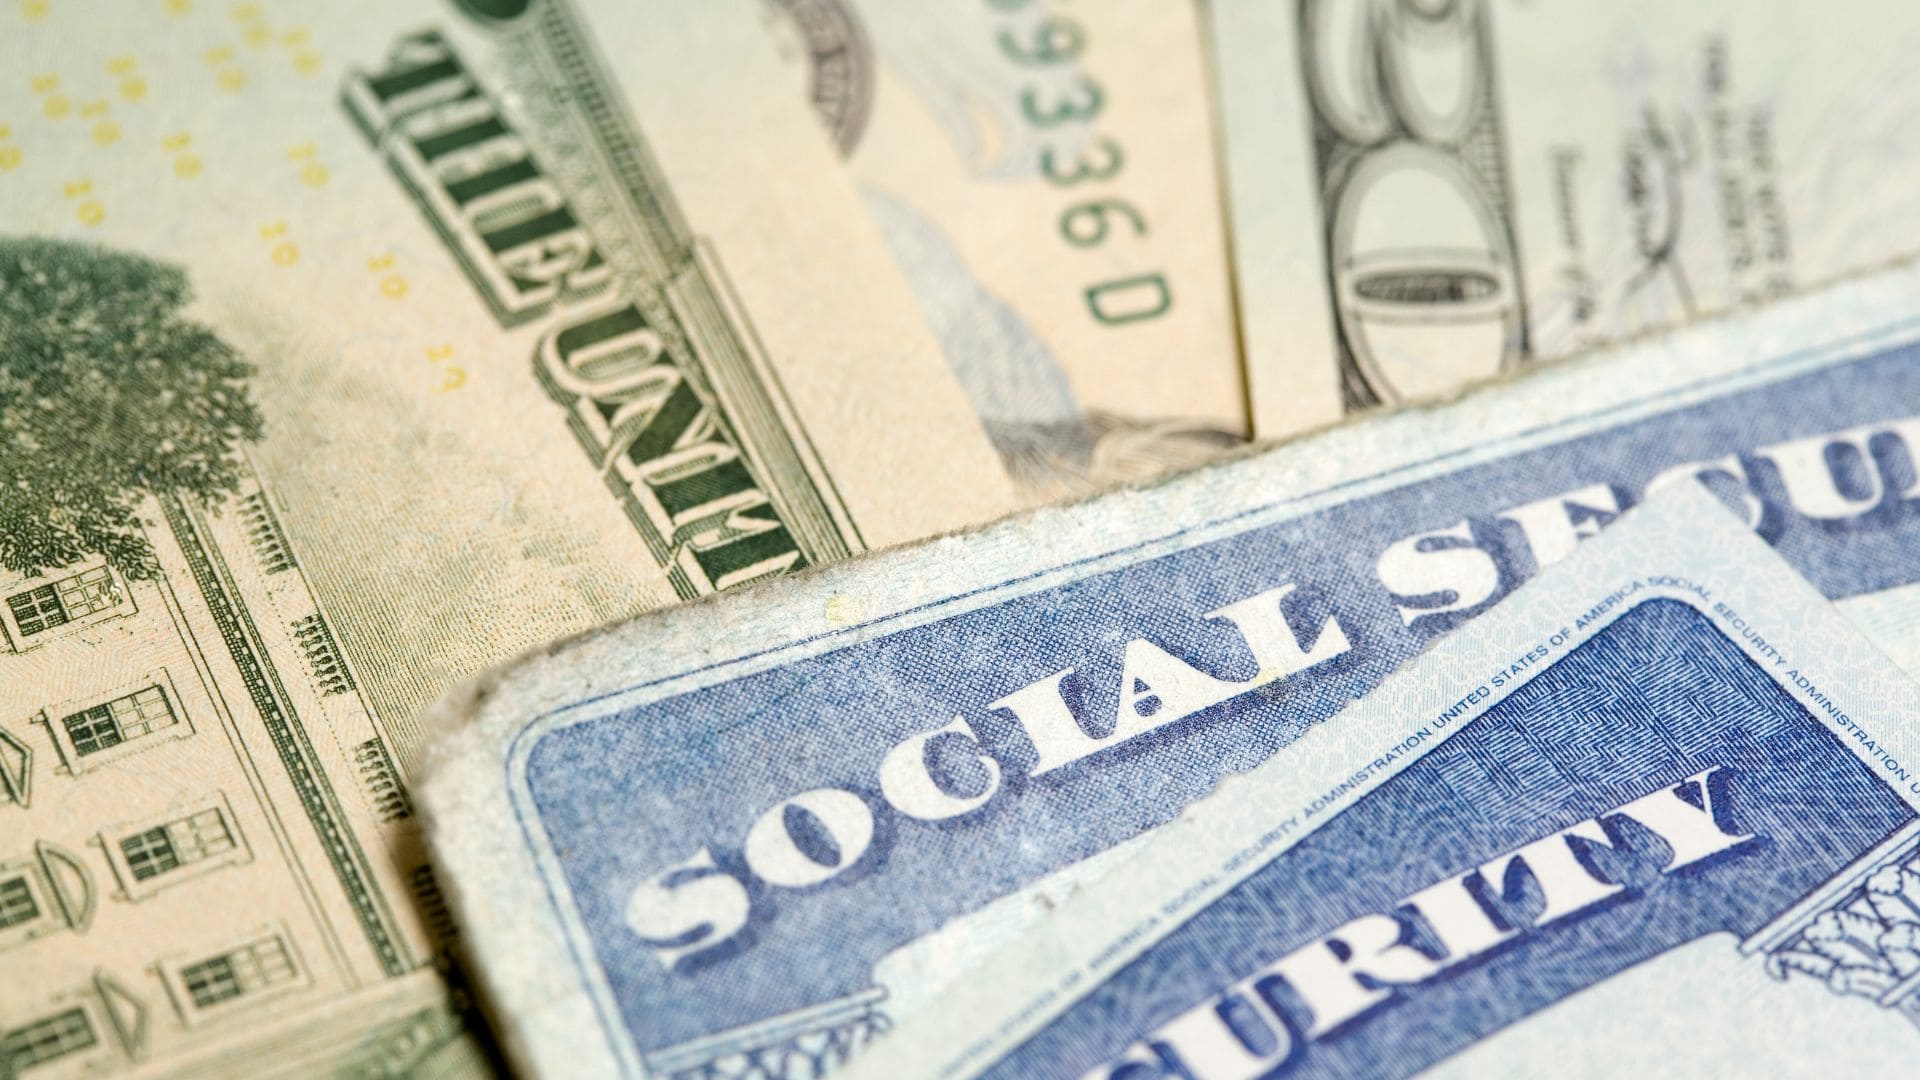 Social Security Administration did not send a check on December 6th